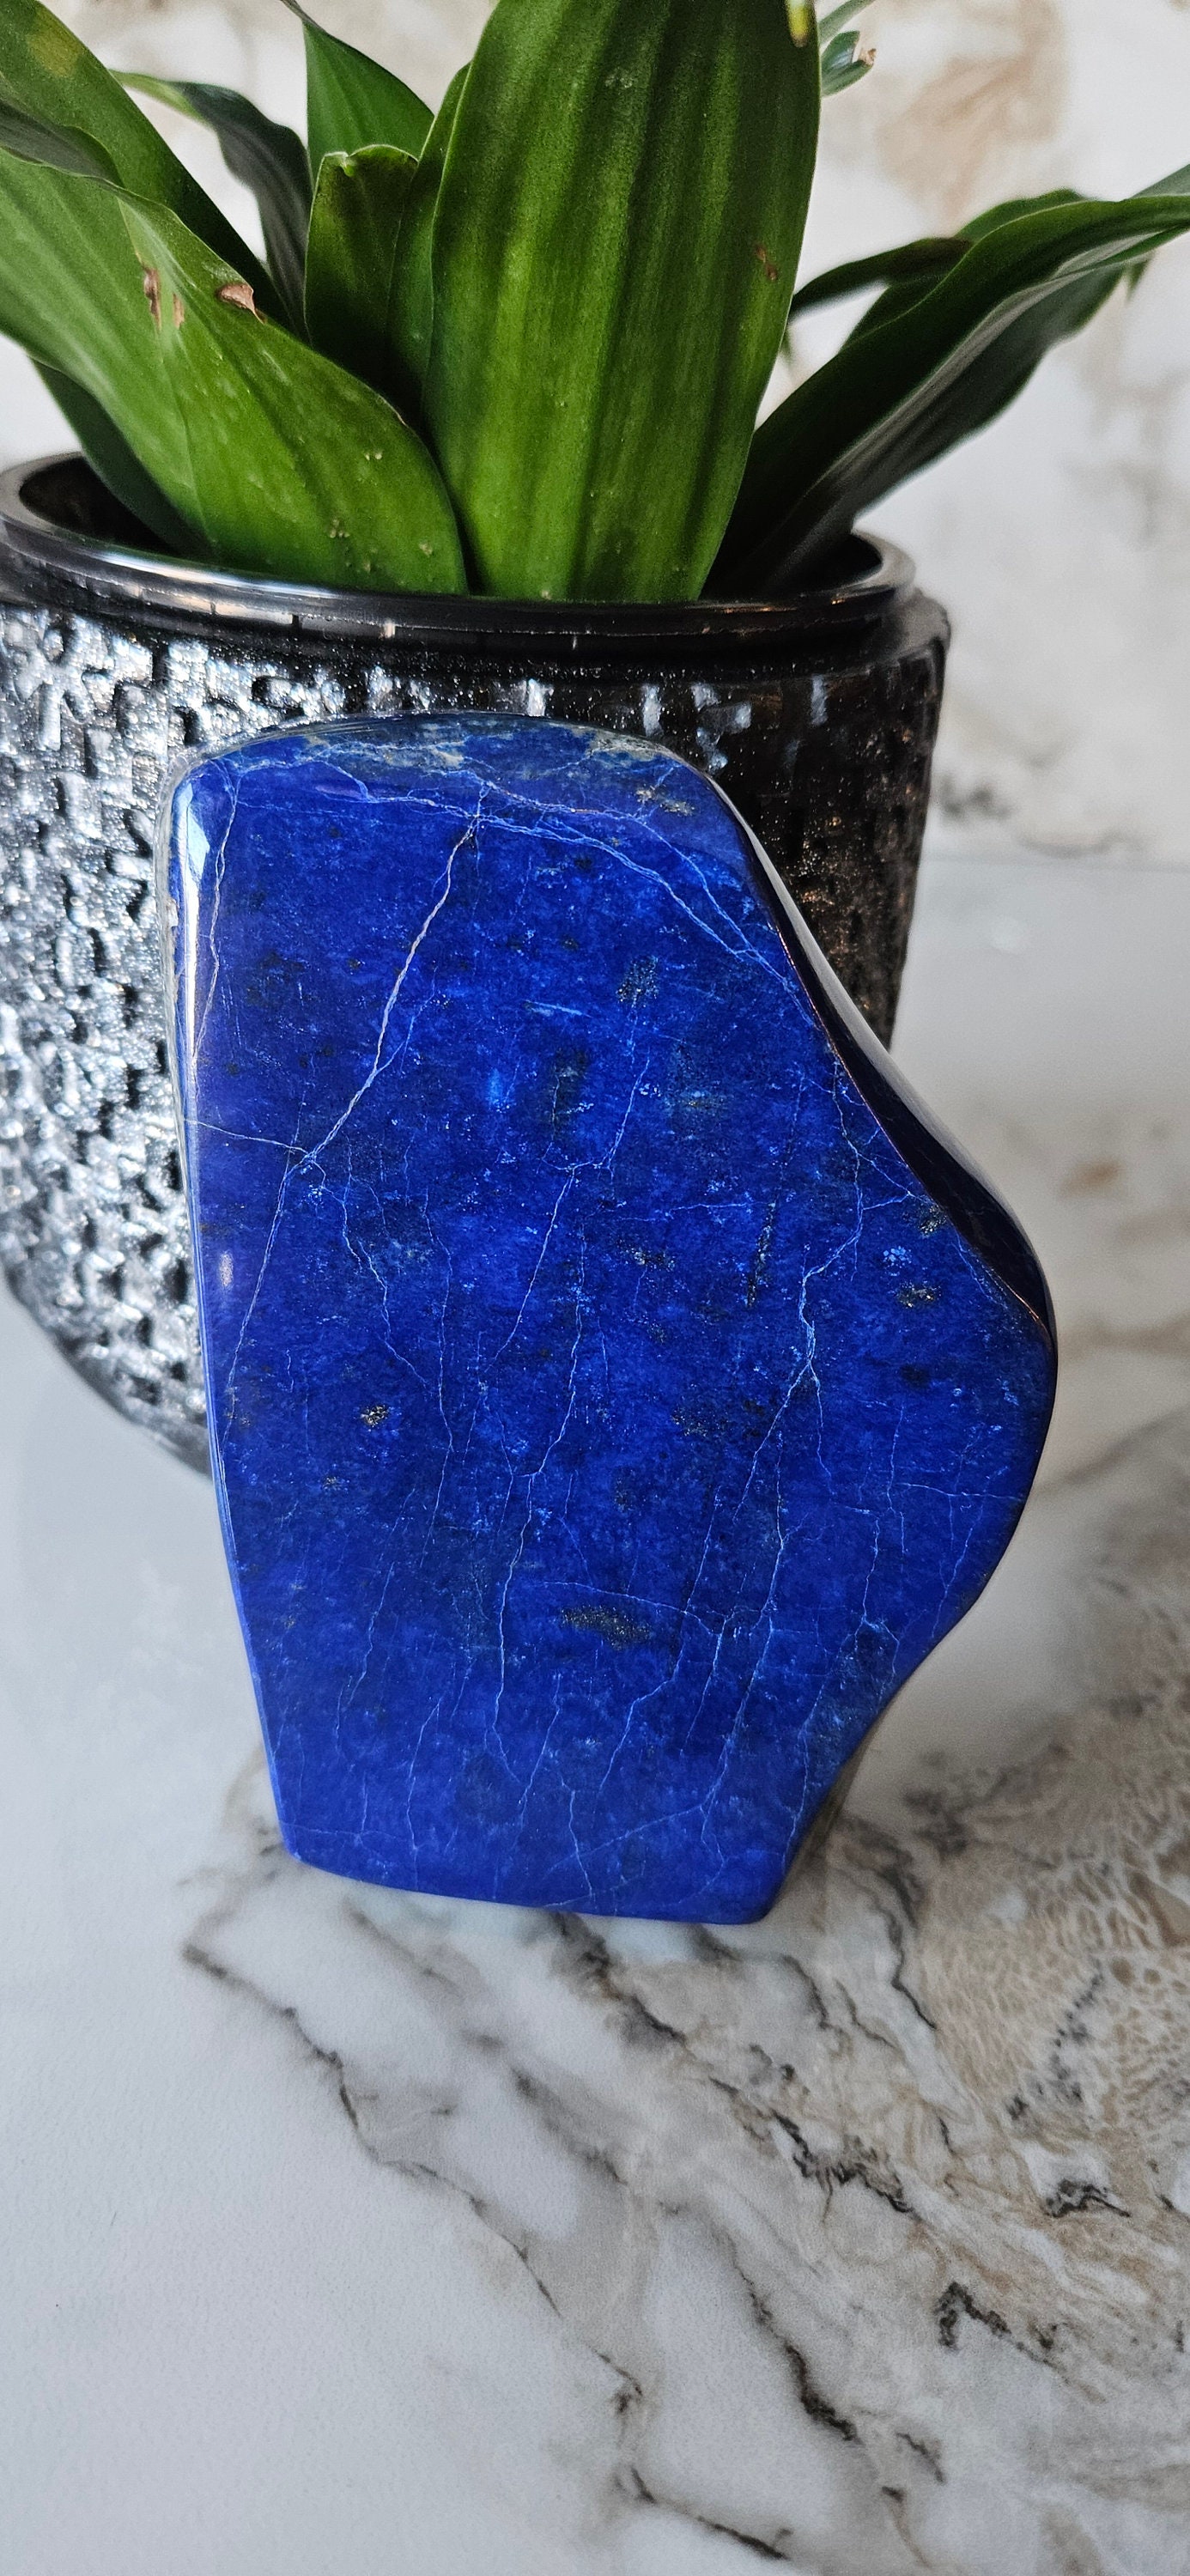 Authentic Lapis Lazuli, Free Form Stone, Tumbled, Gemstone Rock, Kitchen Decoration for The Home and Living Room Calmness, blue stone